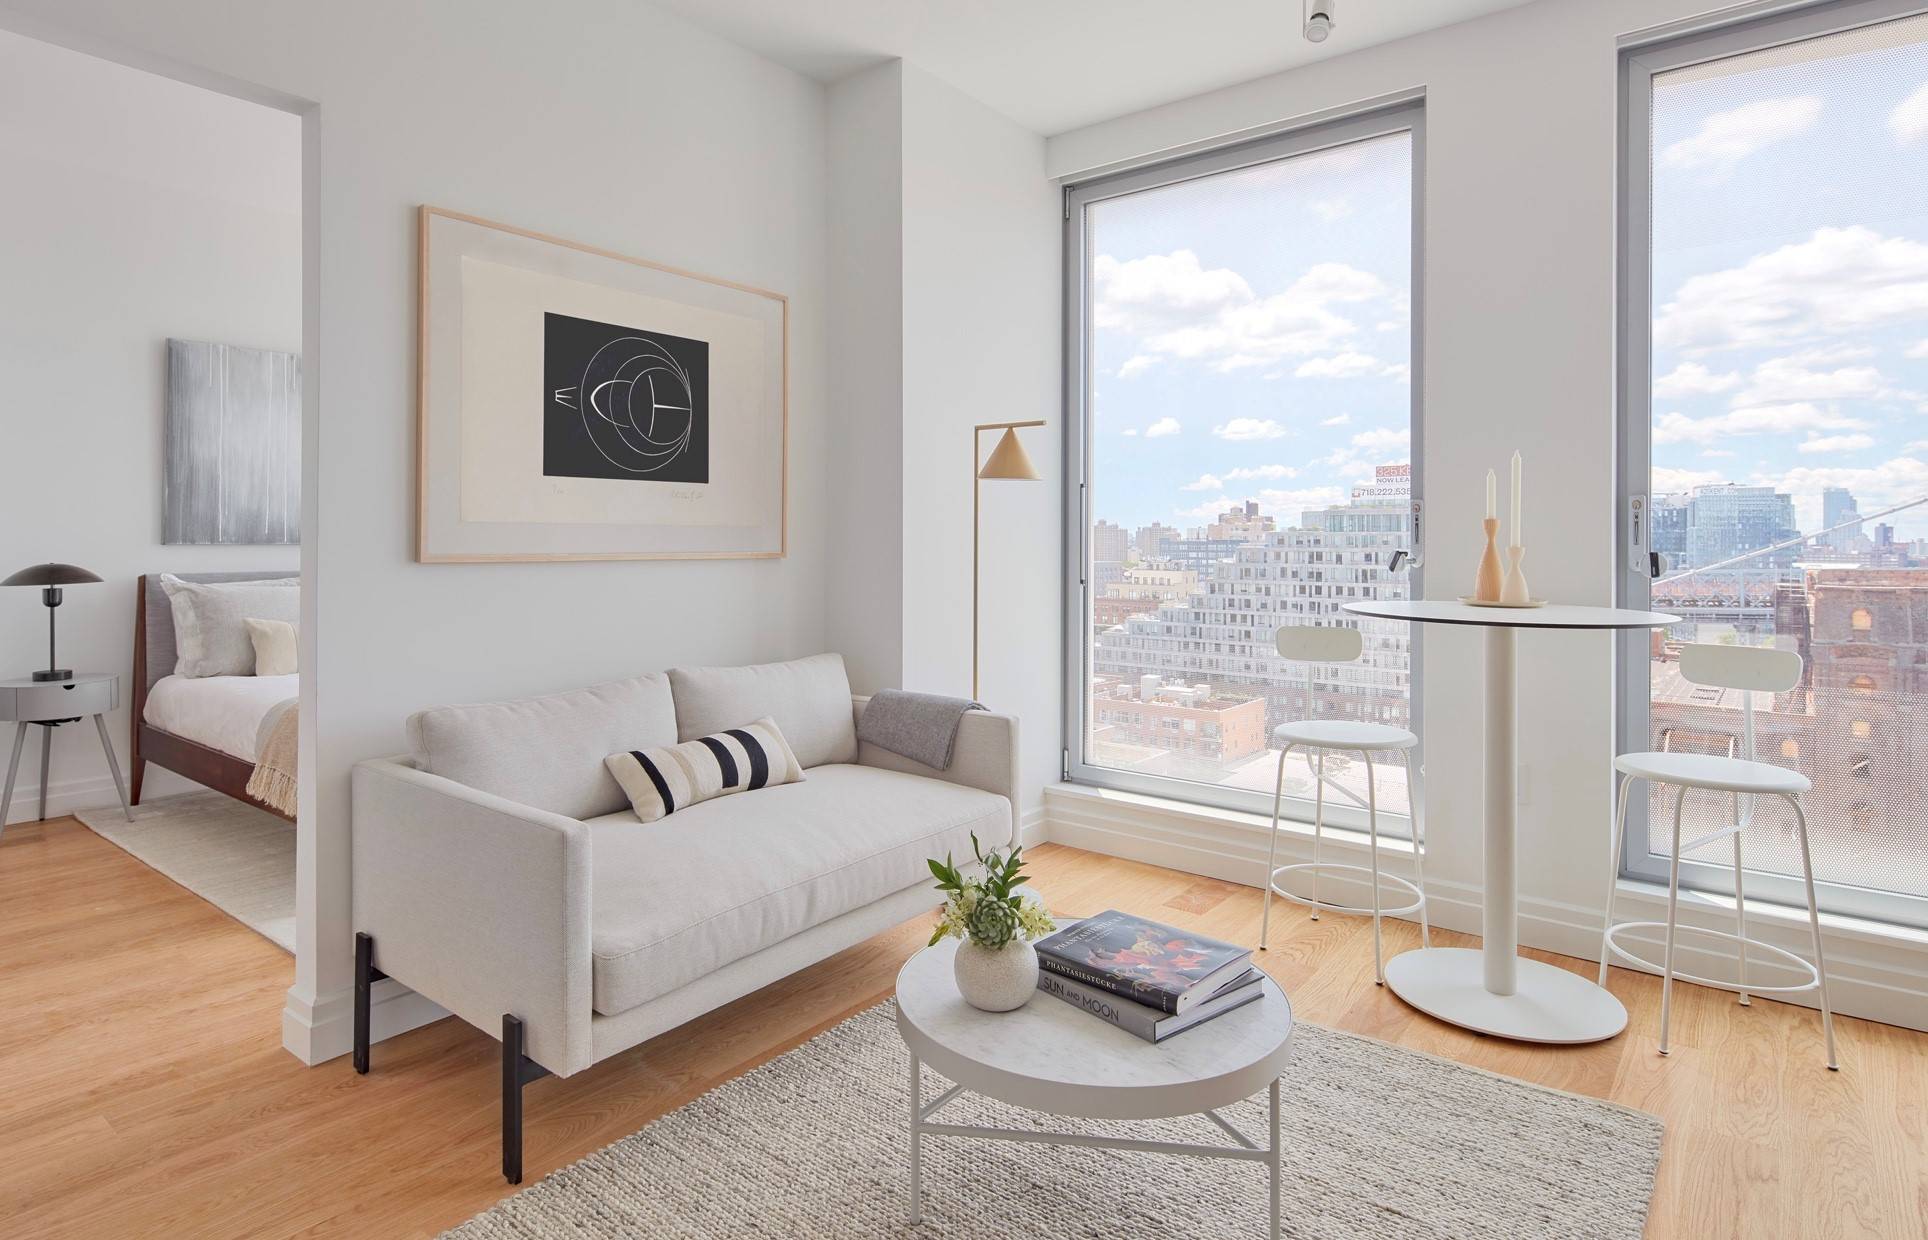 NO FEE, Large Alcove Studio Apartment in Williamsburg in the Full Service Luxury Building